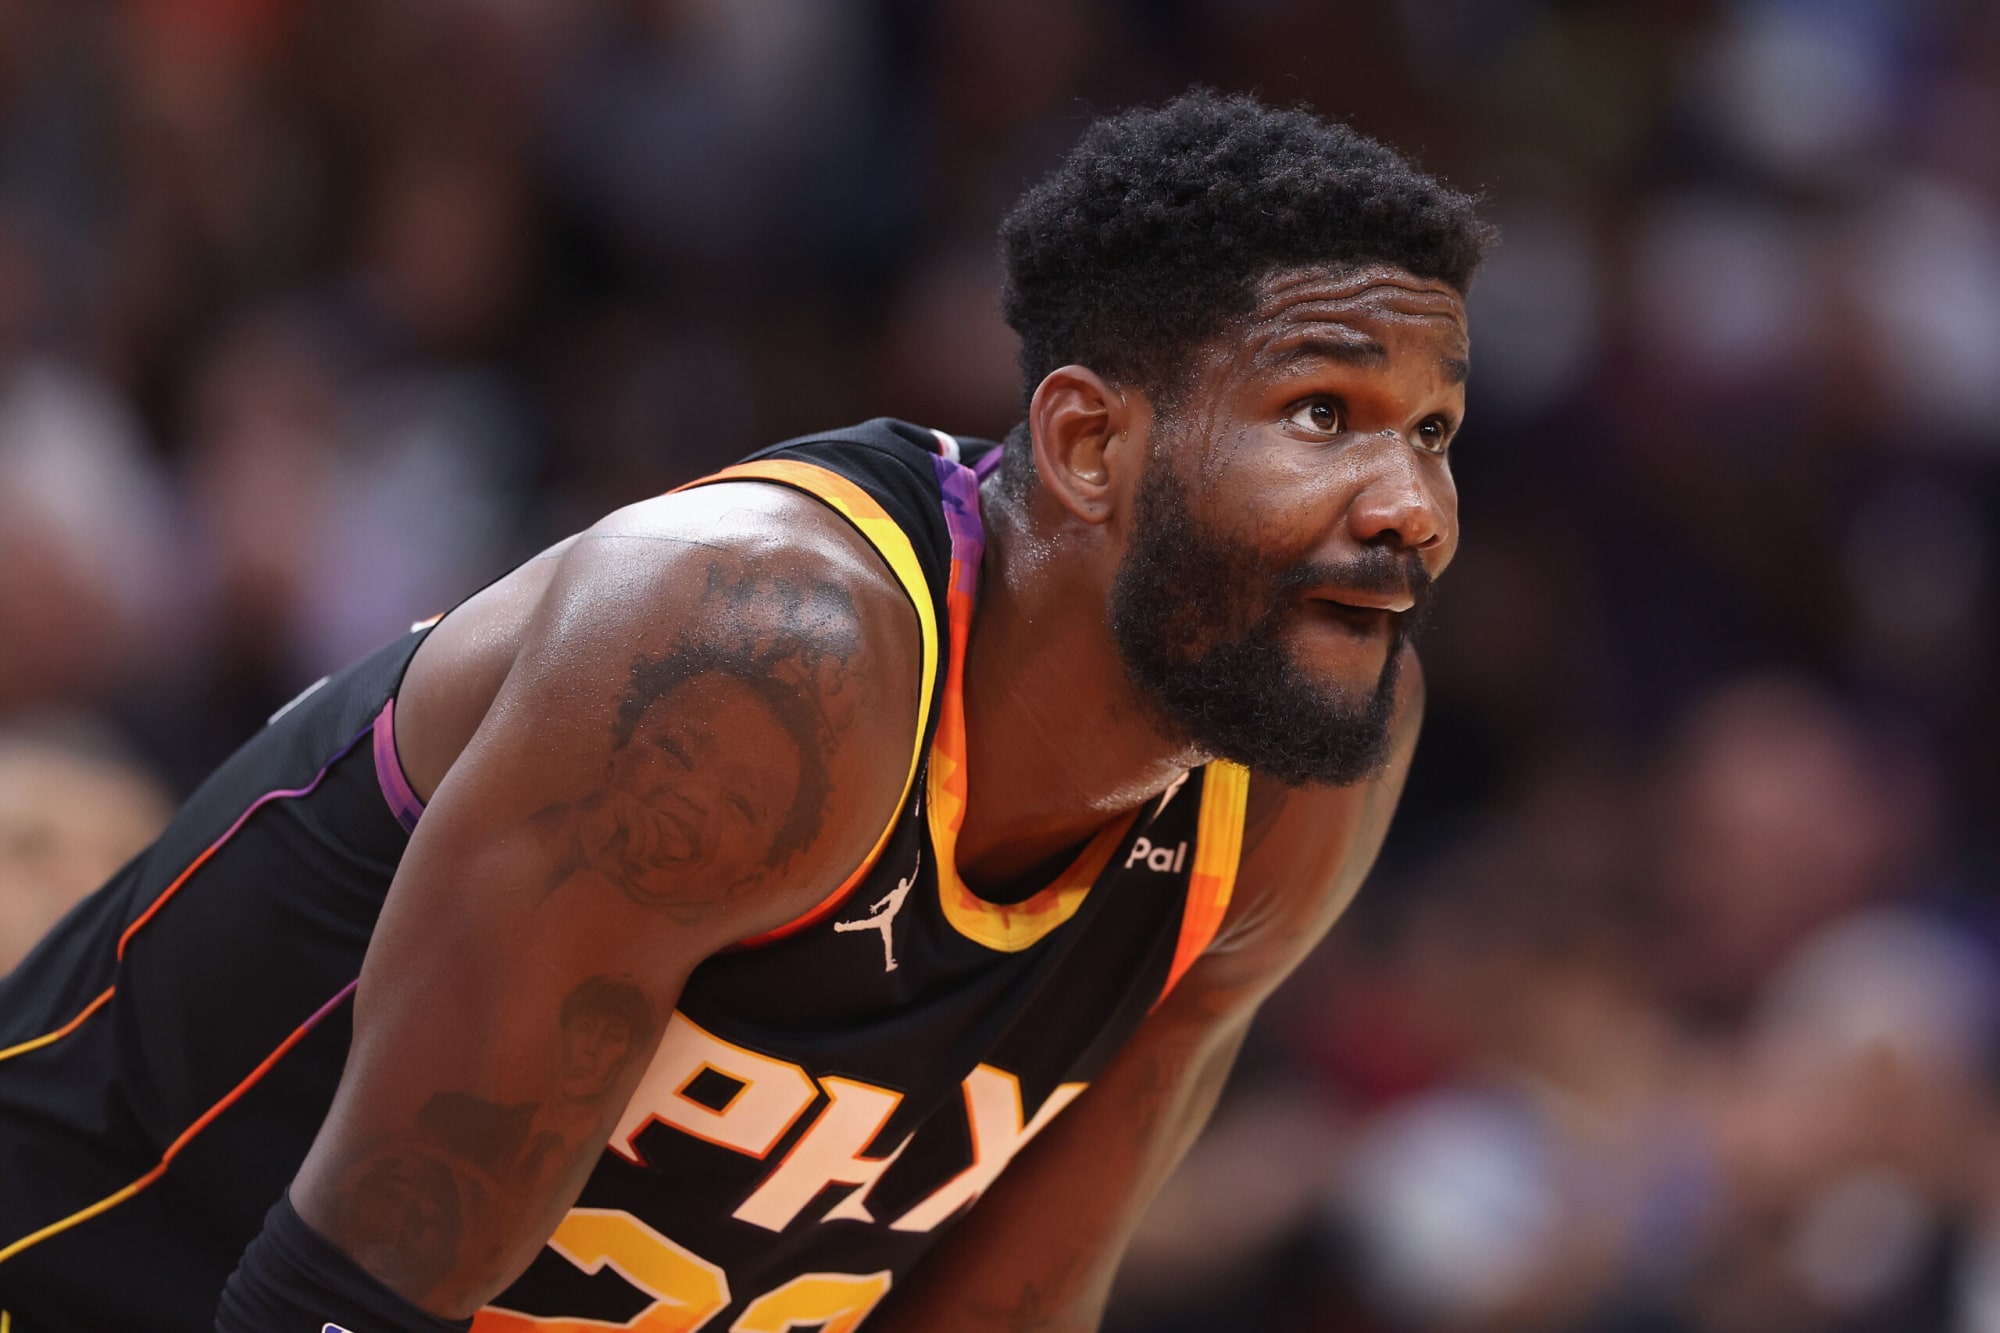 How much has the Suns’ Deandre Ayton regressed?